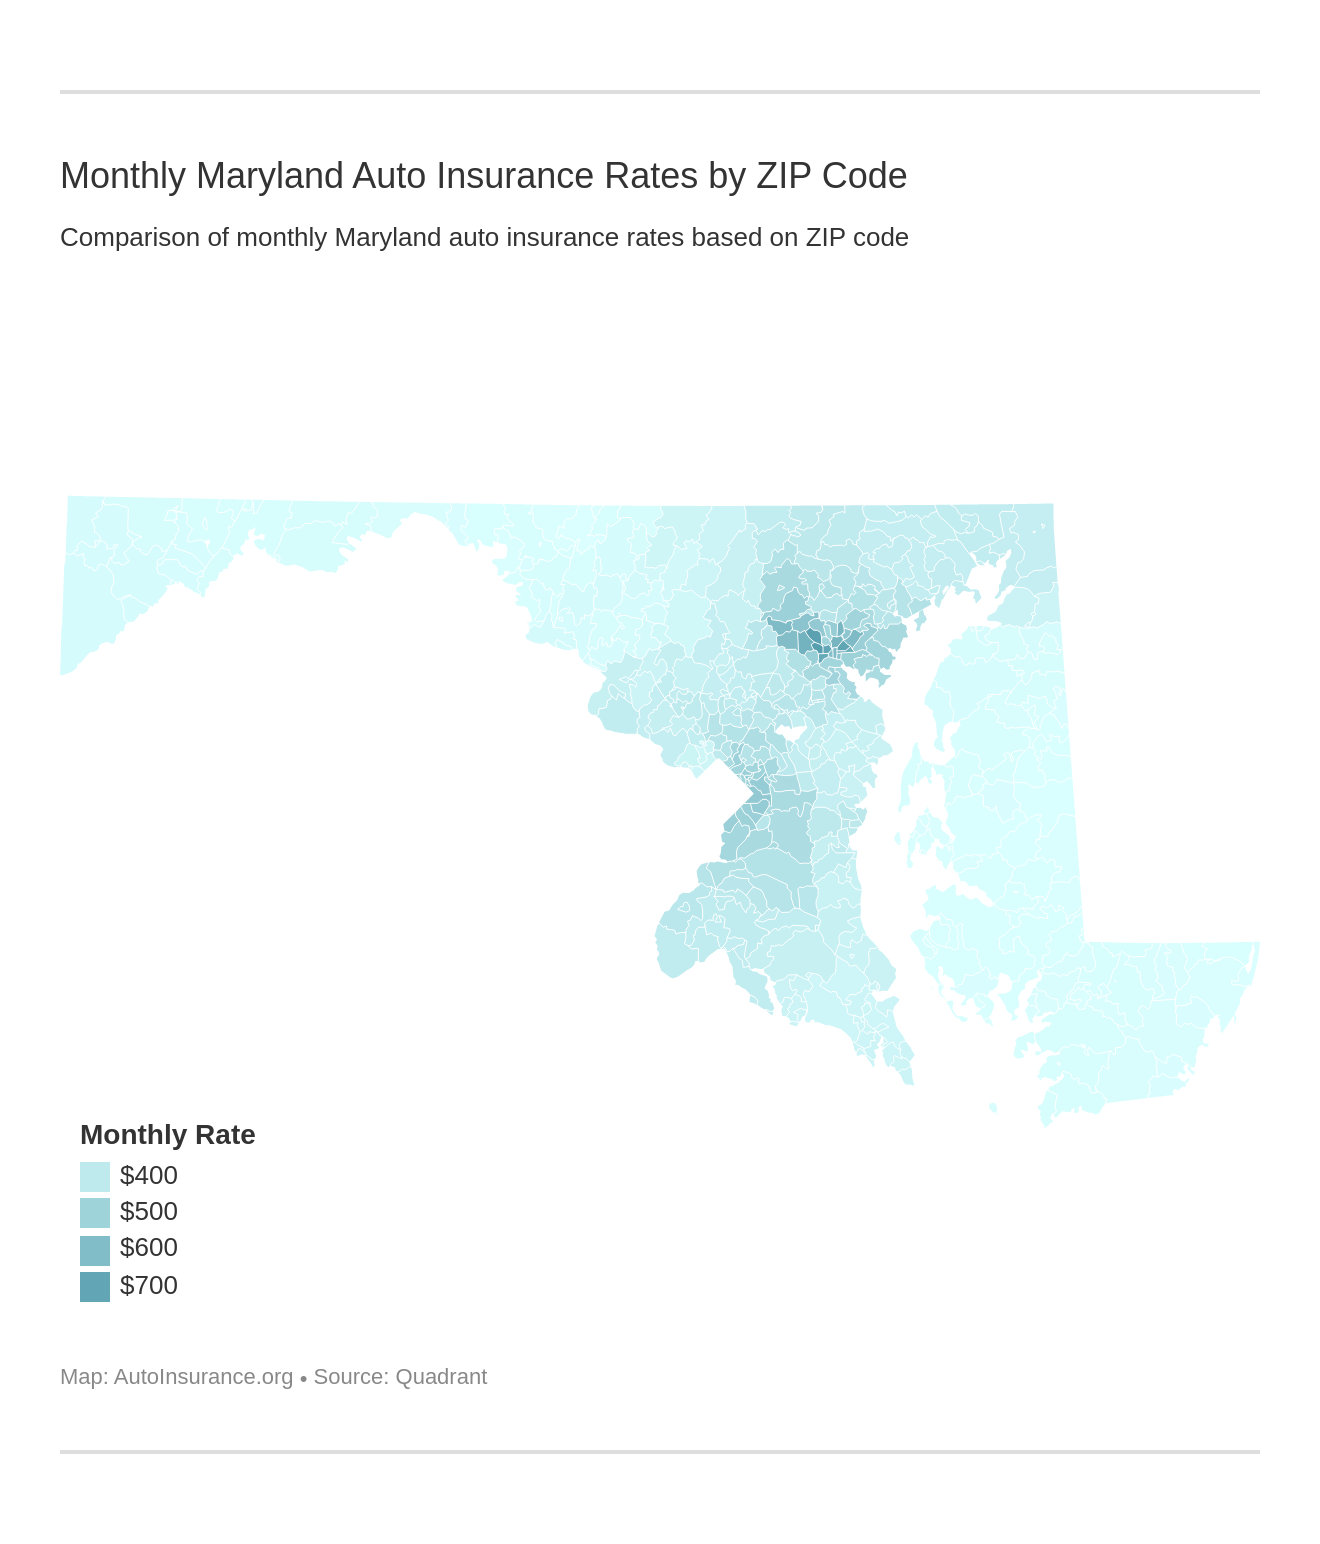 Monthly Maryland Auto Insurance Rates by ZIP Code